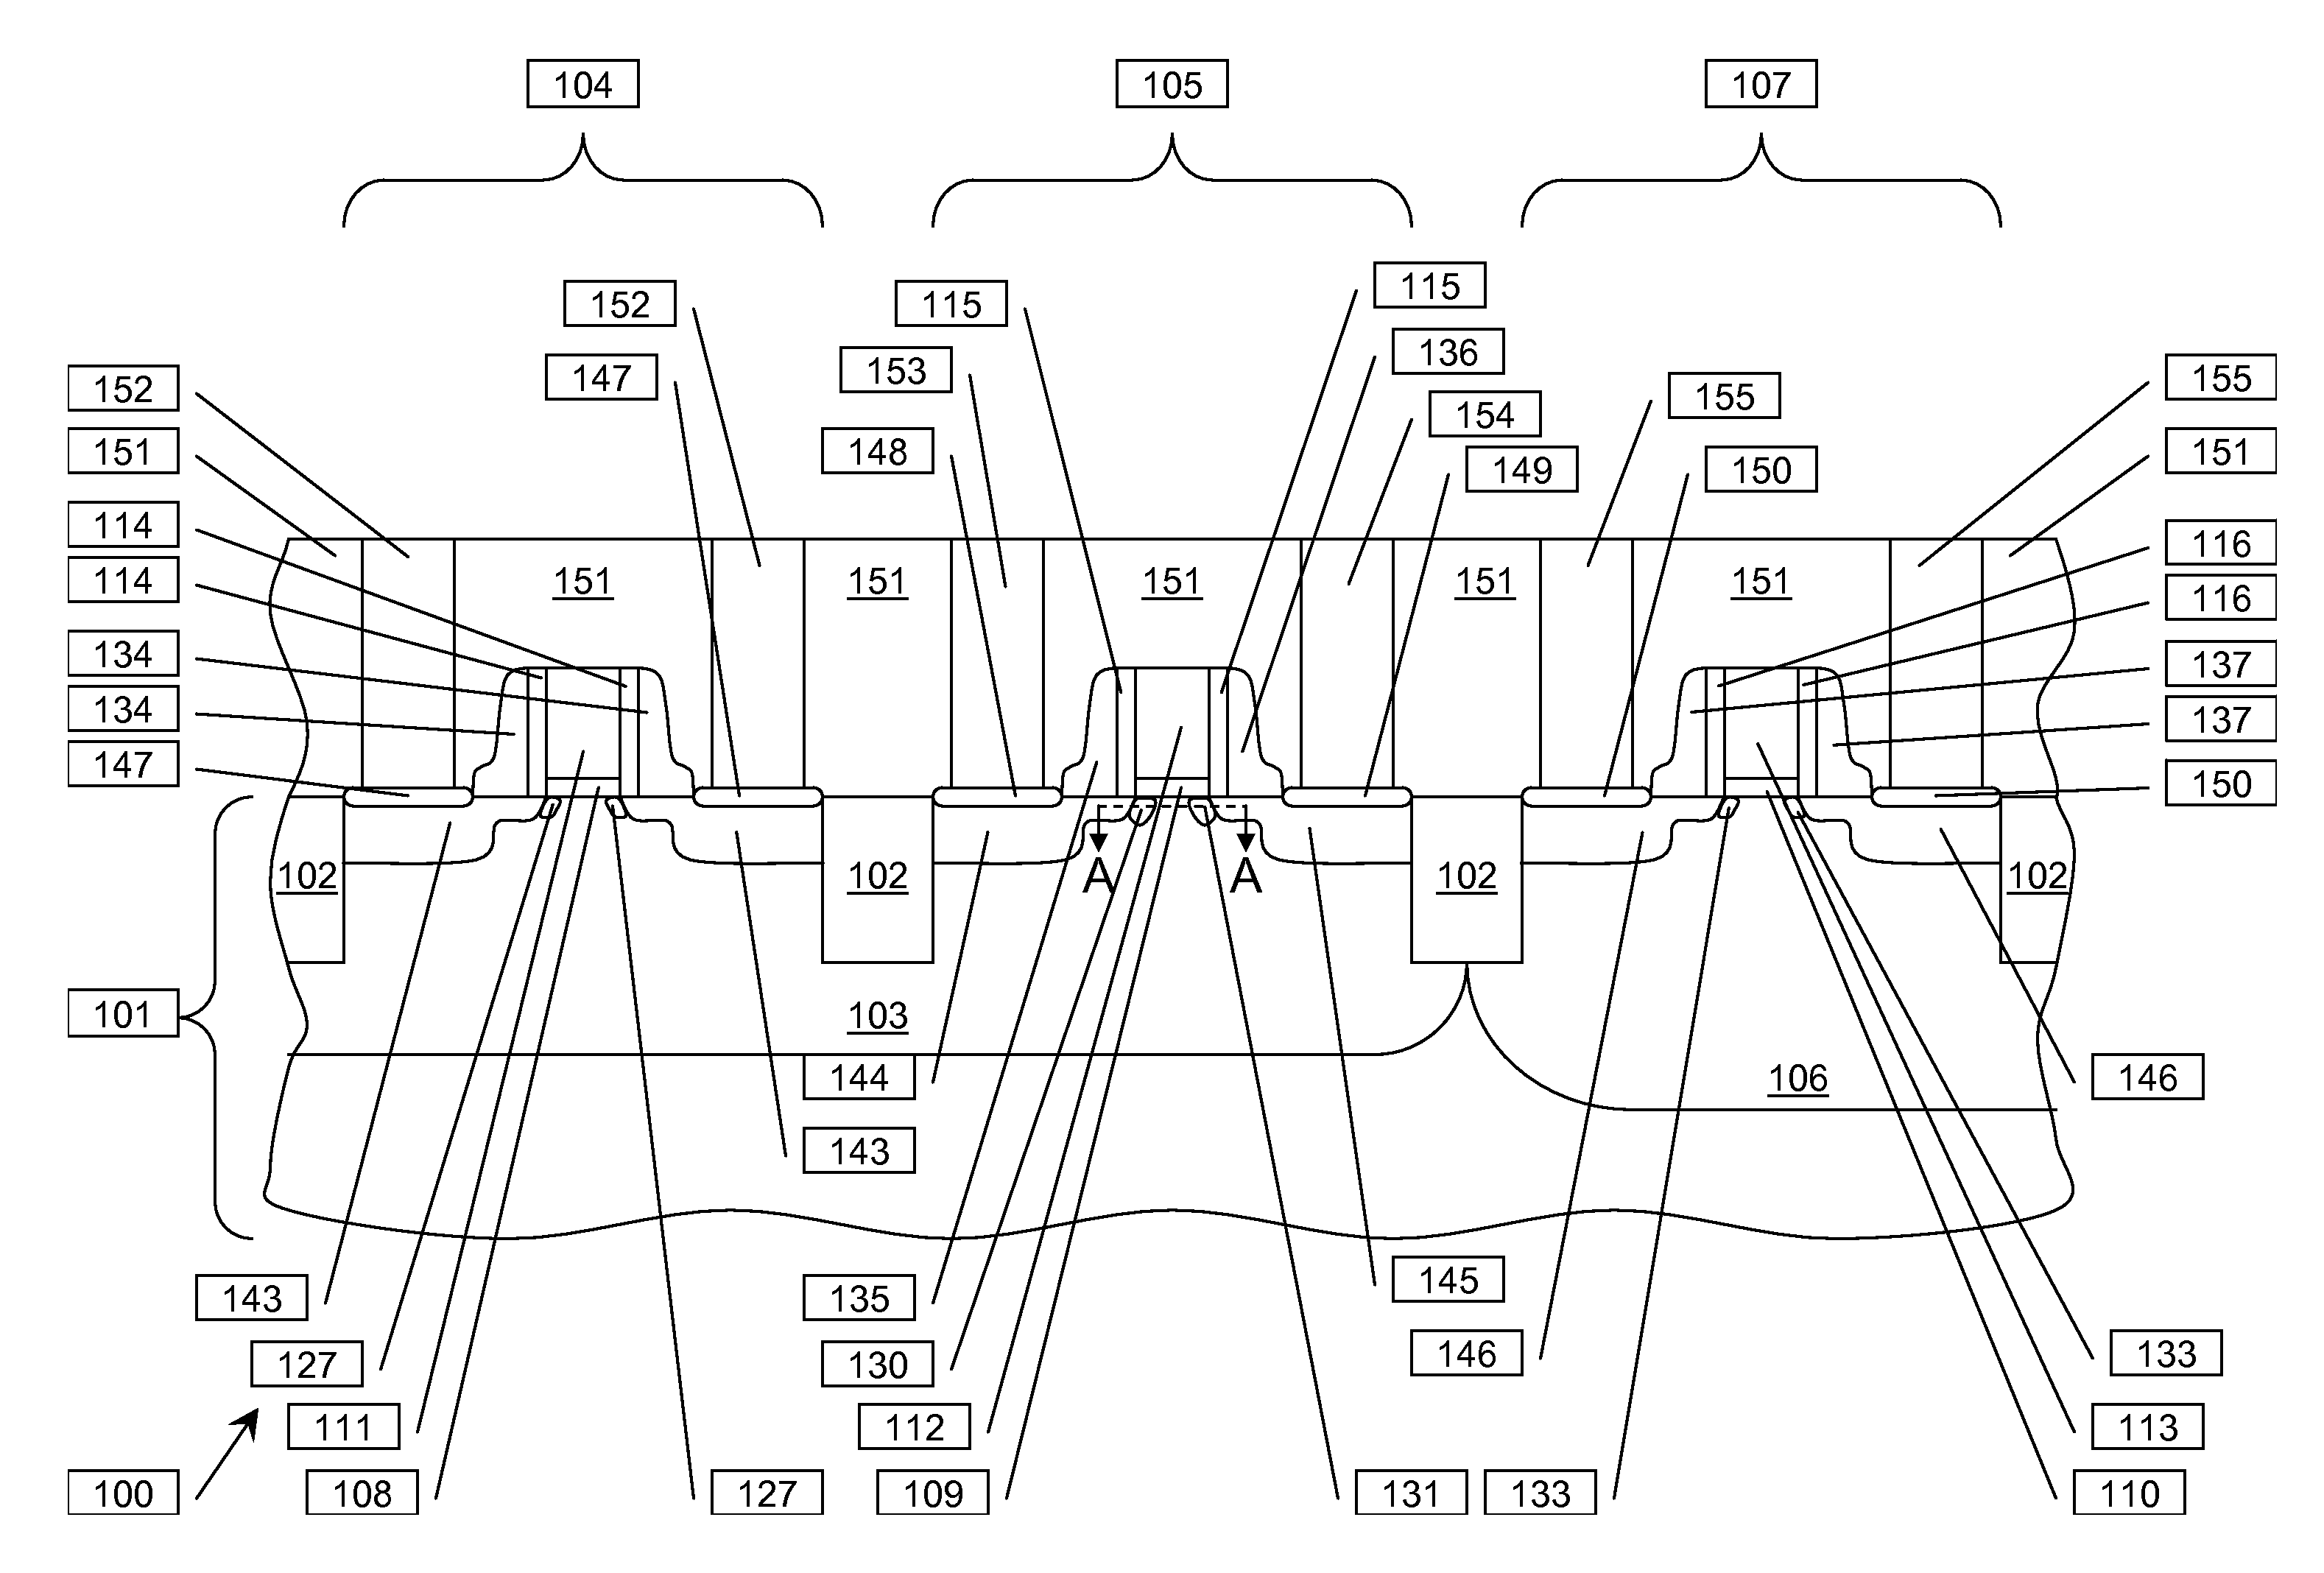 Gated Quantum Resonant Tunneling Diode Using CMOS Transistor with Modified Pocket and LDD Implants